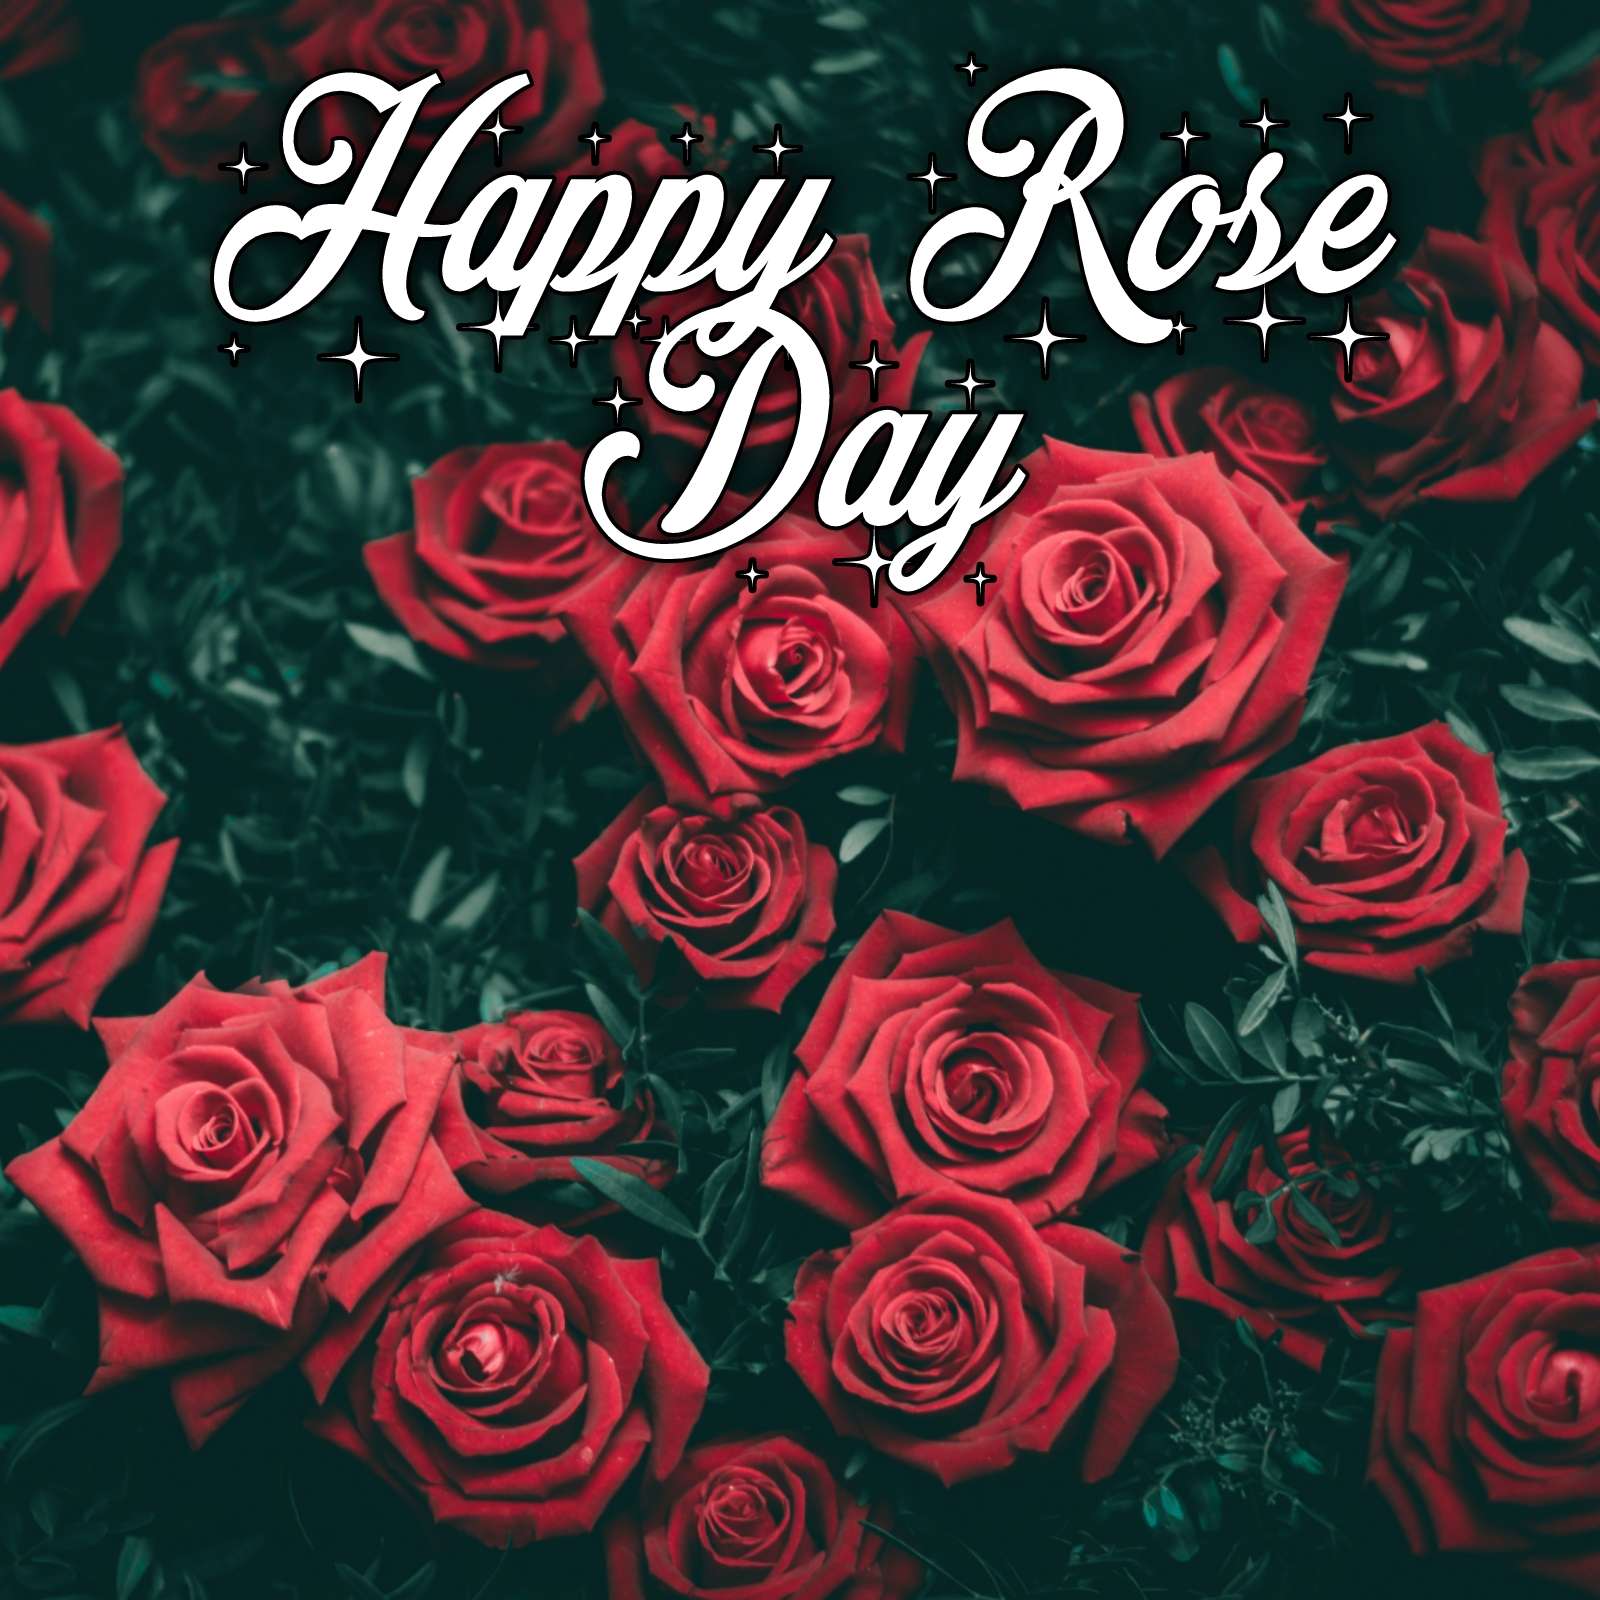 Happy Rose Day Images Hd Download